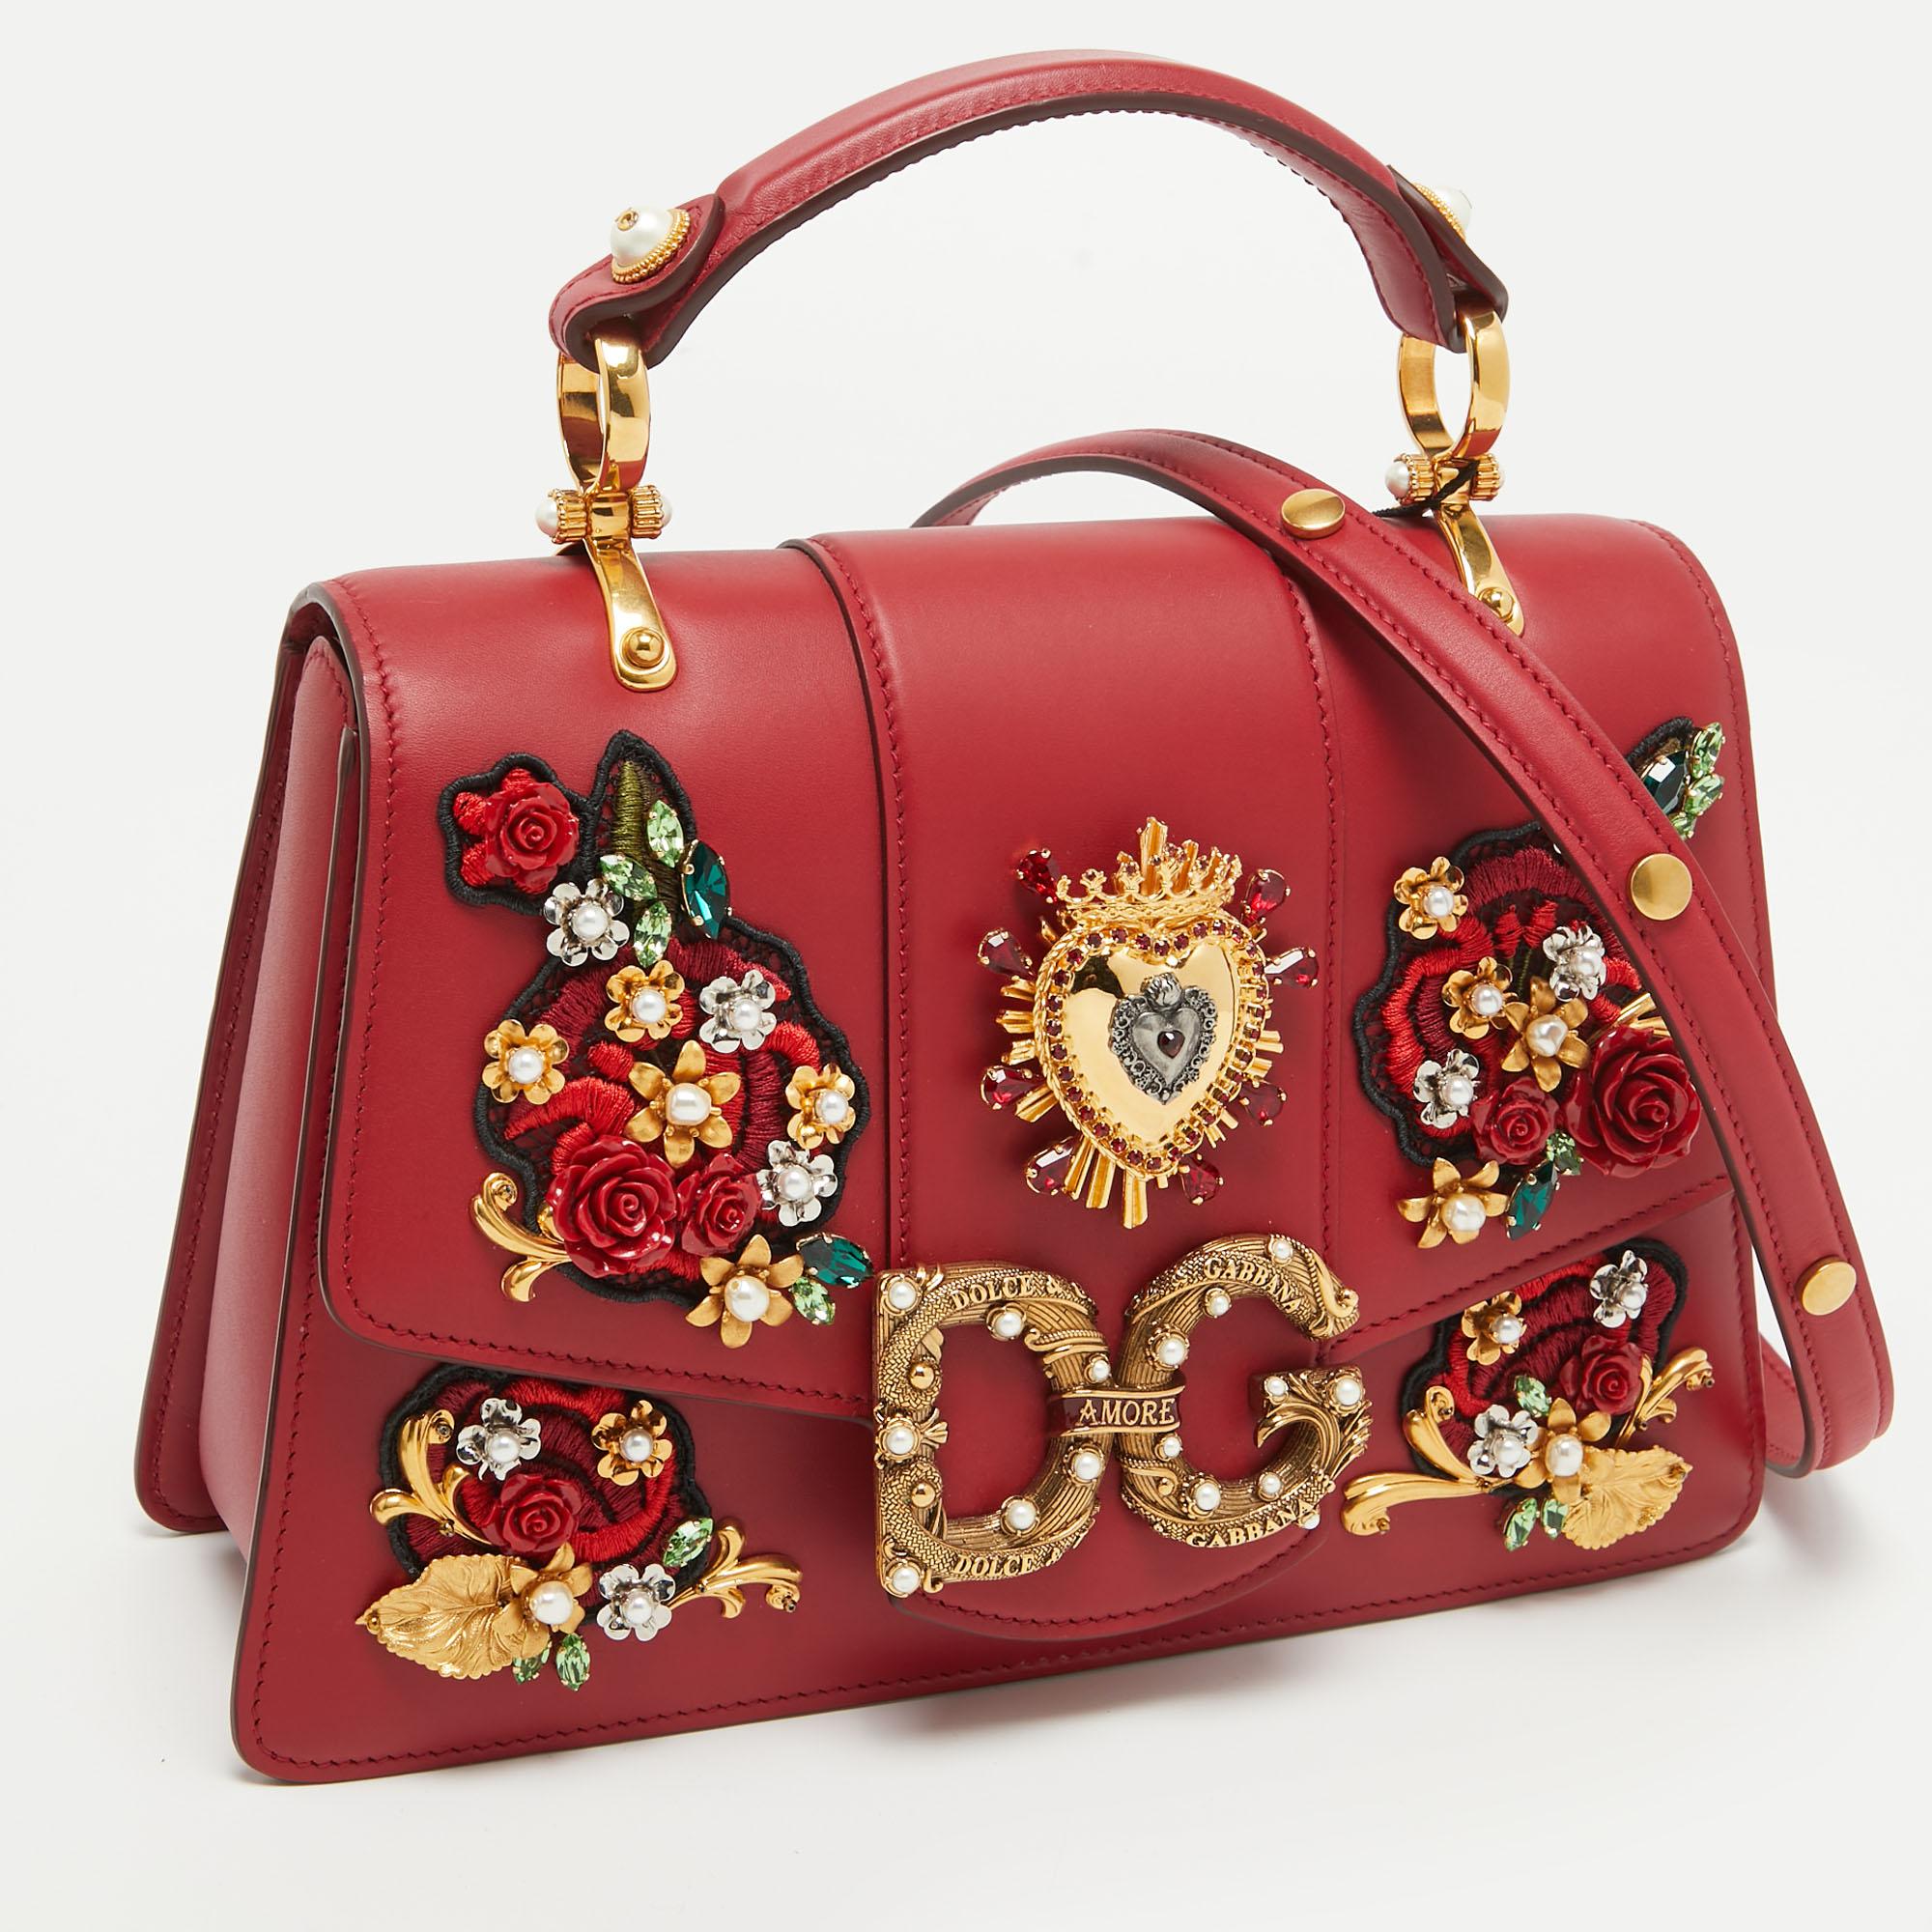 Dolce & Gabbana Red Leather DG Amore Crystals Top Handle Bag In Excellent Condition For Sale In Dubai, Al Qouz 2